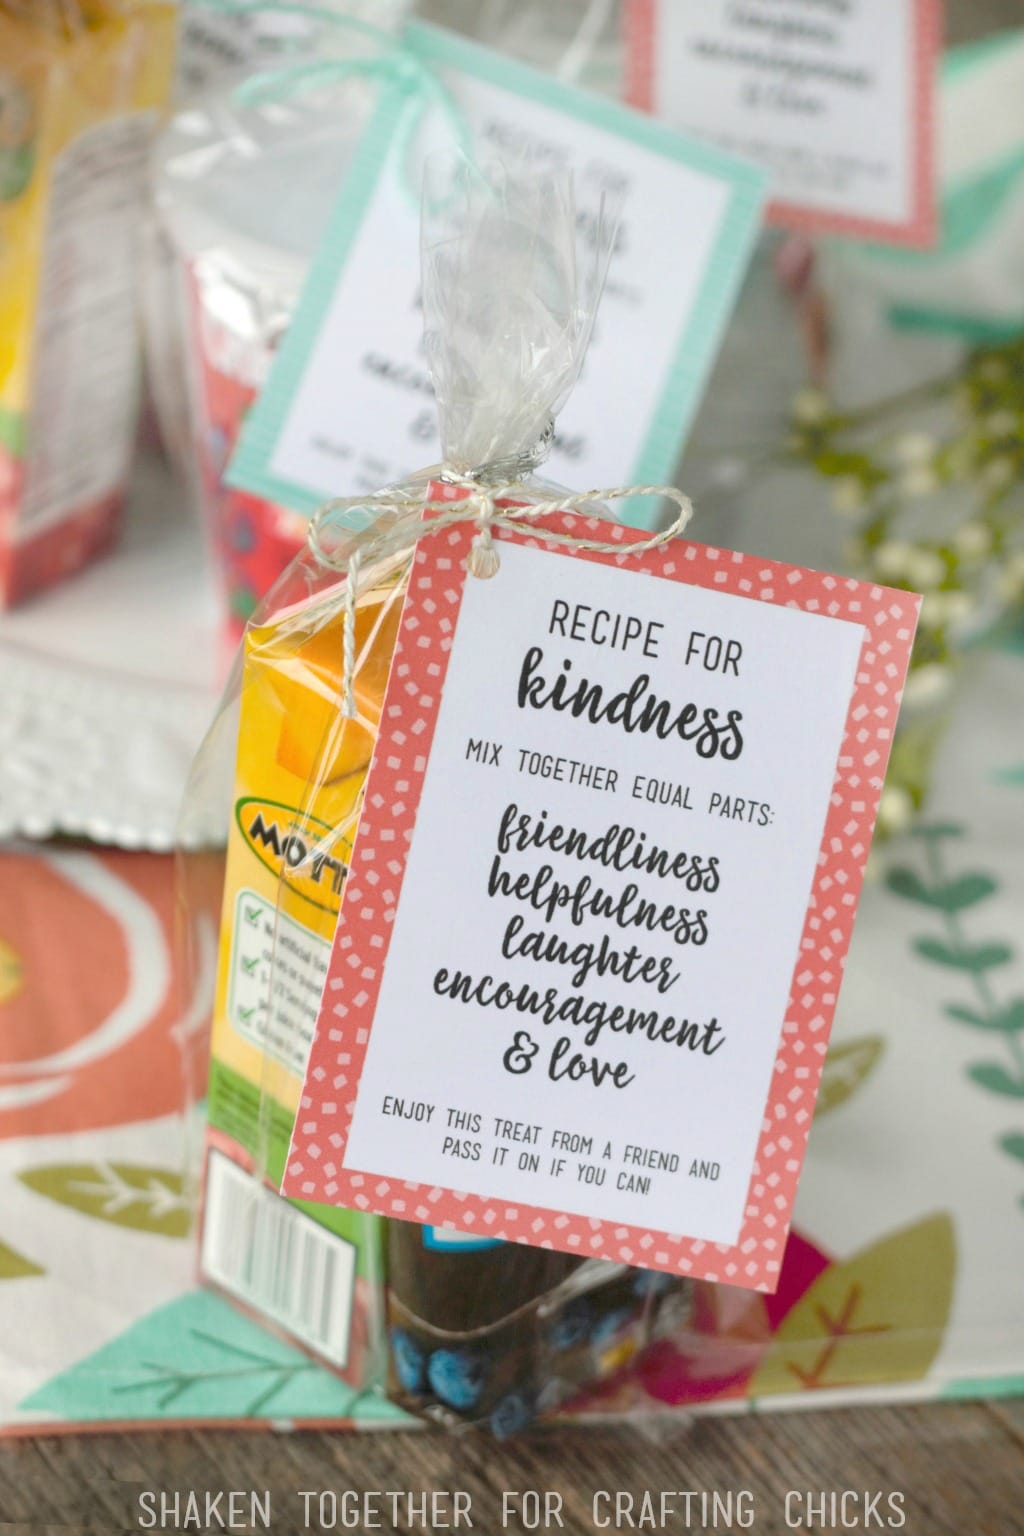 Encourage generosity and kindness in children with these Recipe for Kindness Random Acts of Kindness Treat Bags! Tons of ideas for bag fillers and printable tags, too!